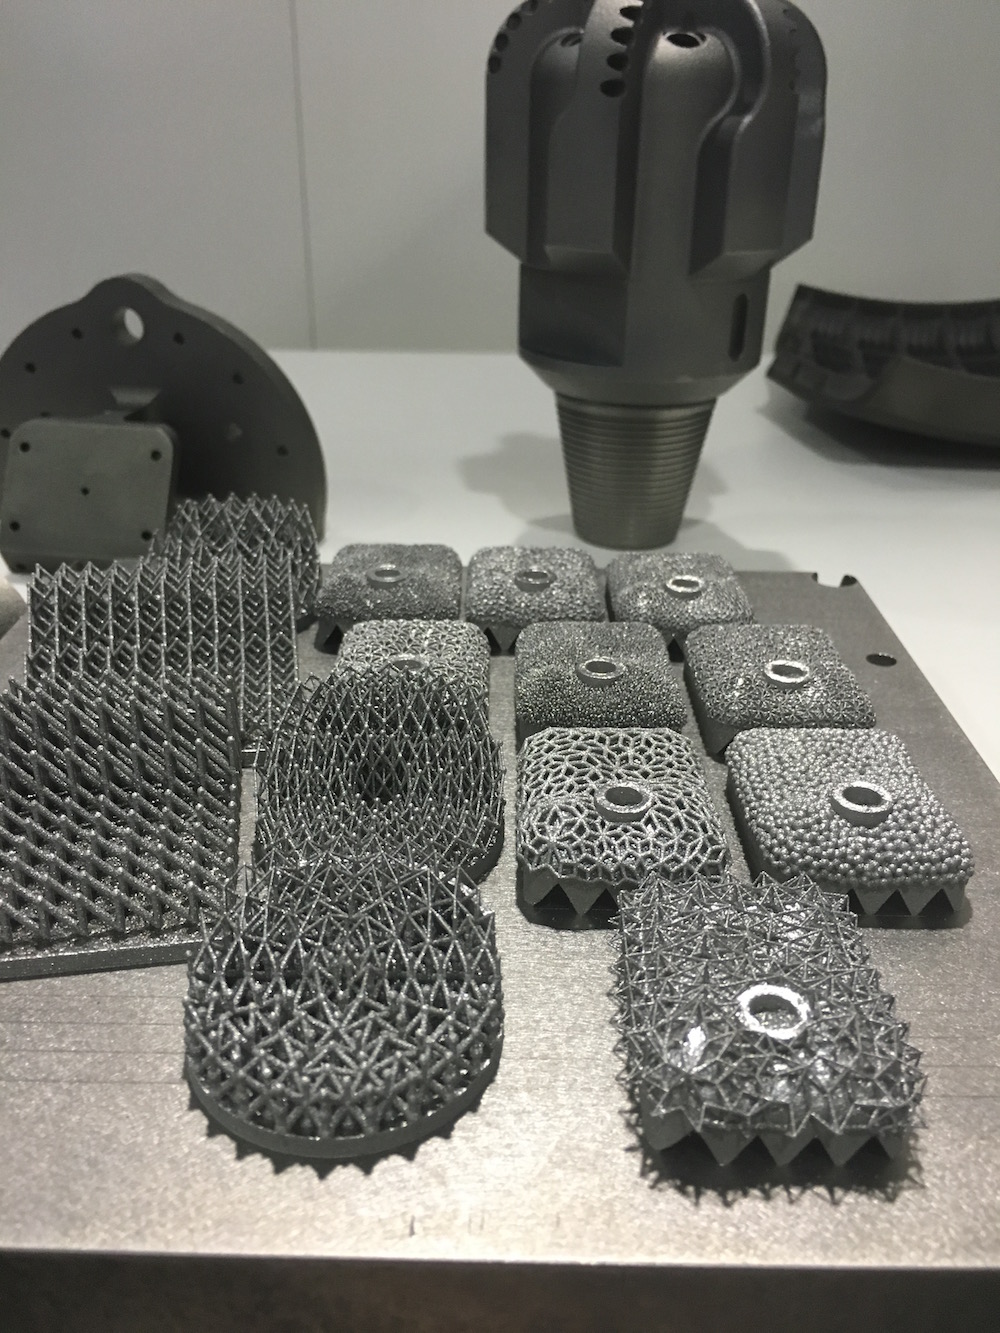  Sample metal parts produced by 3D Systems 